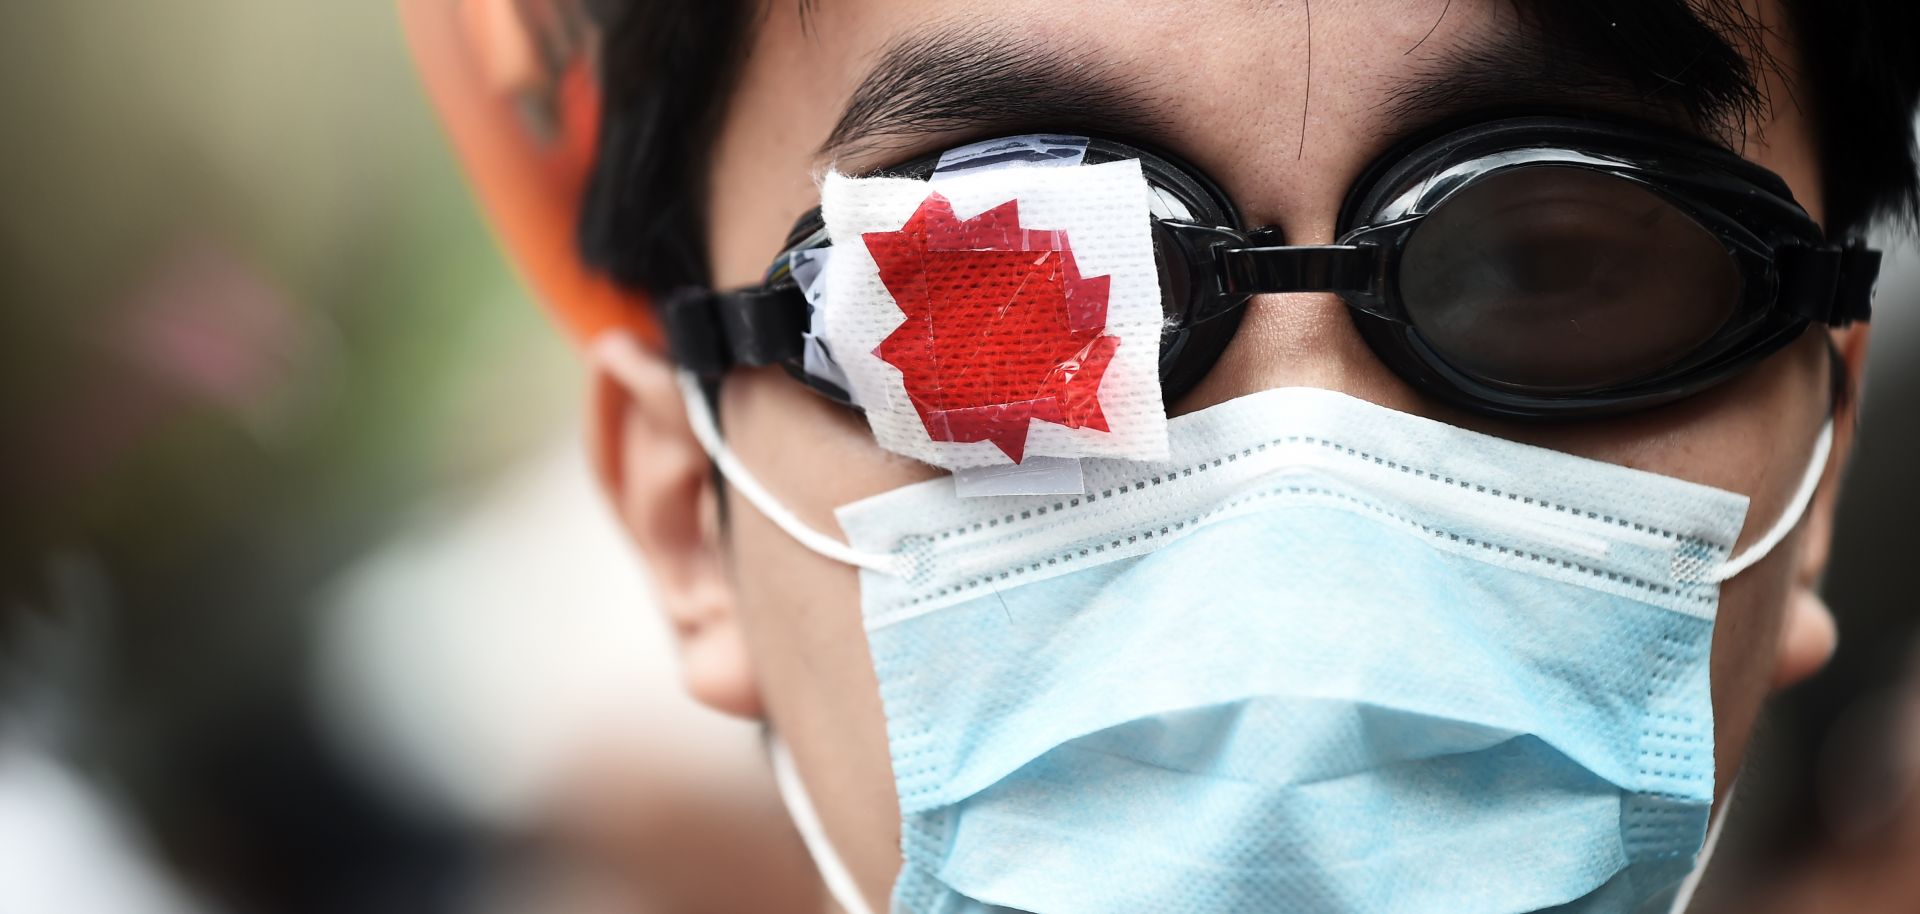 A protester attends a rally Aug. 23, 2019, at Chater Garden in Hong Kong. As protests become more geographically dispersed, frequent and violent, the chances of a direct intervention by Beijing are increasing.